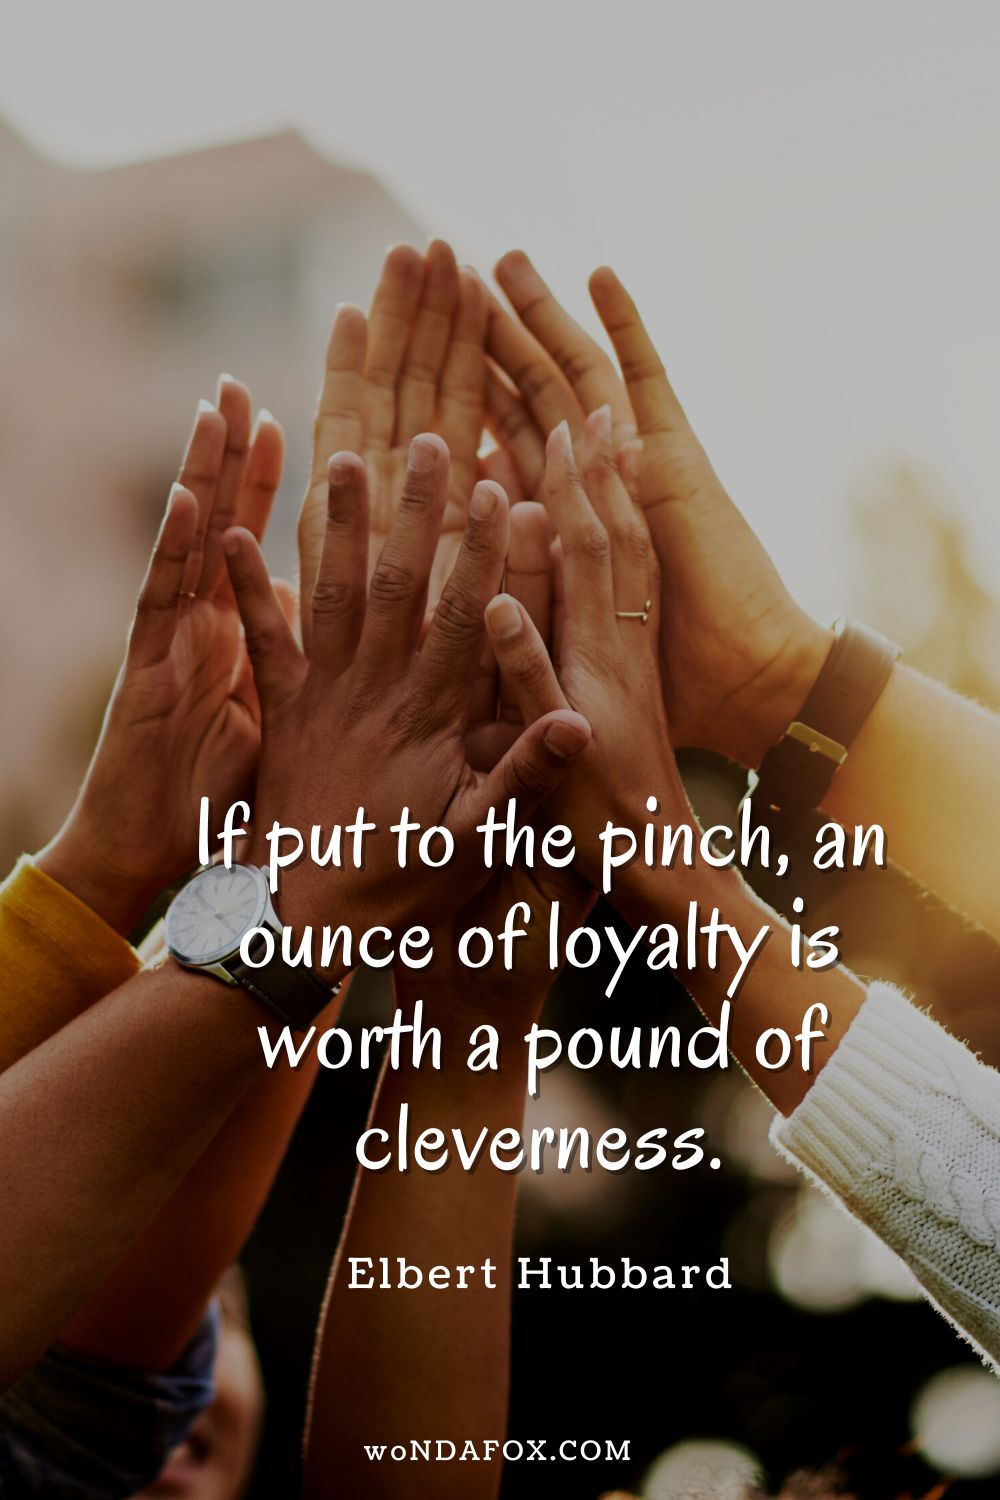 If put to the pinch, an ounce of loyalty is worth a pound of cleverness.” 